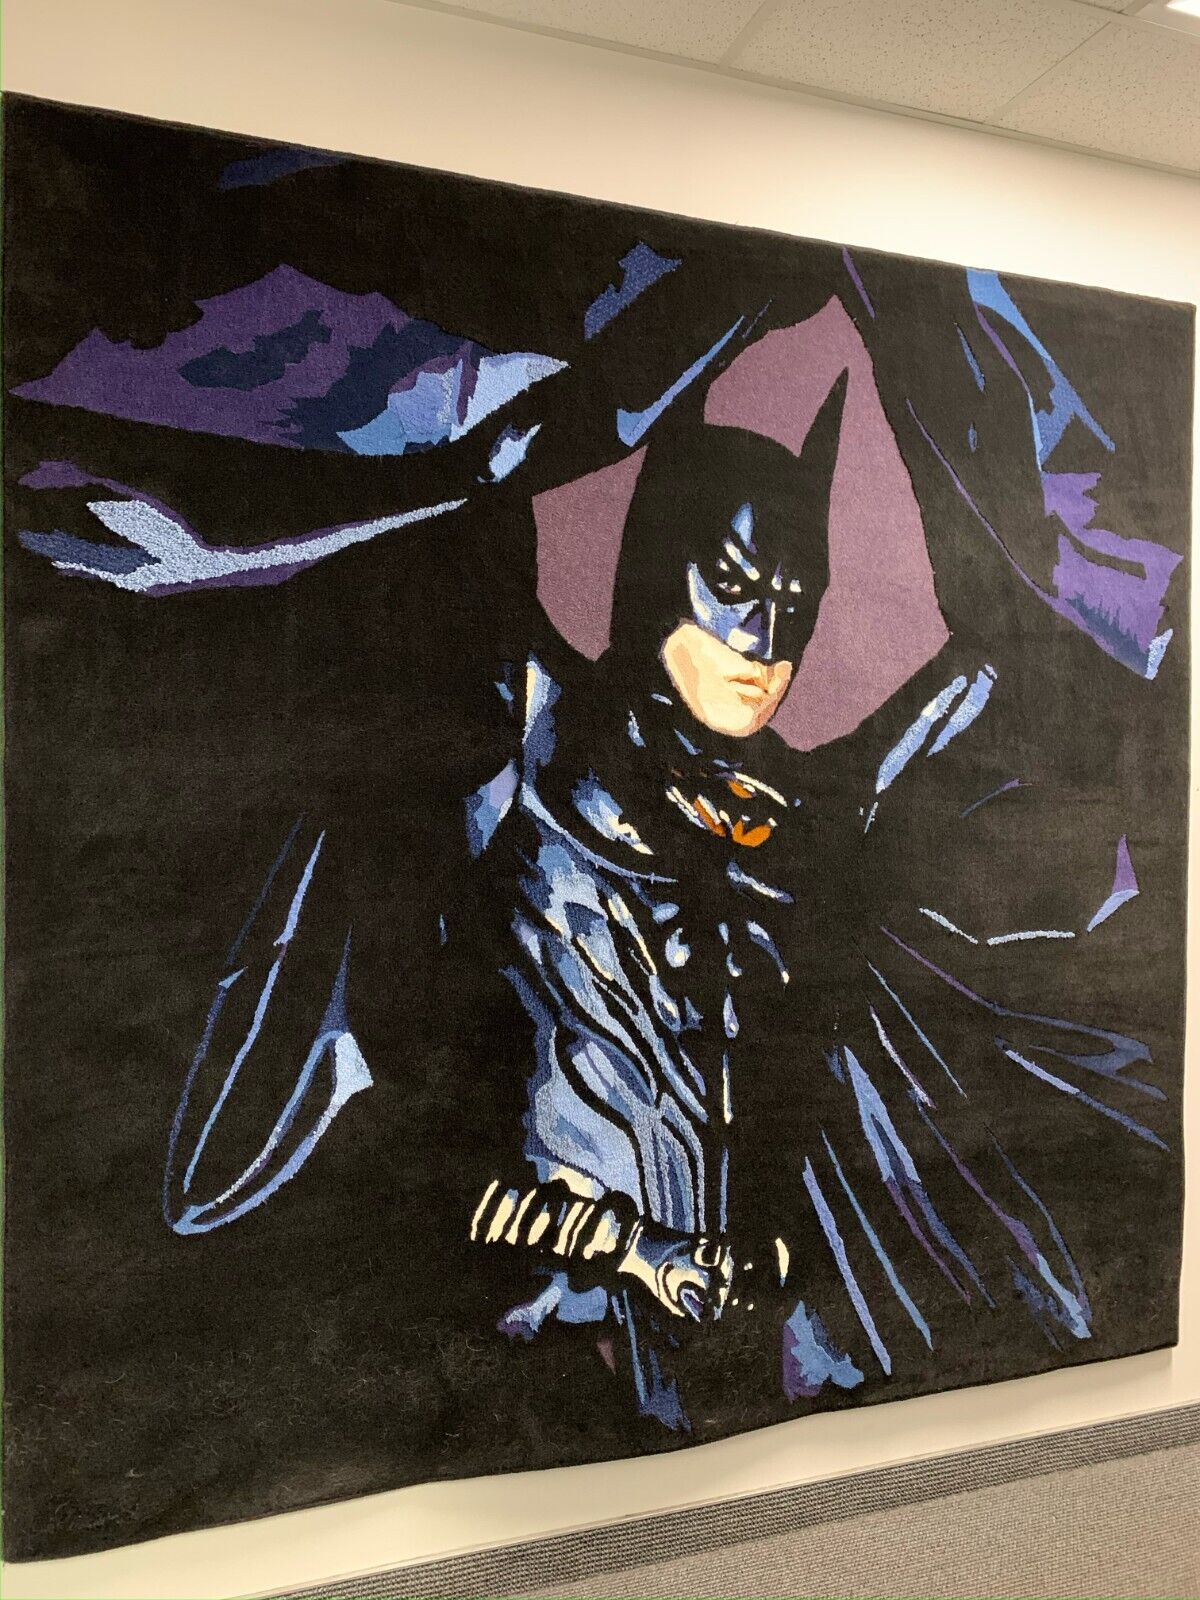 Keith Collins 1995 Batman Val Kilmer Giant Tapestry 92”x 96” - 1 of a kind